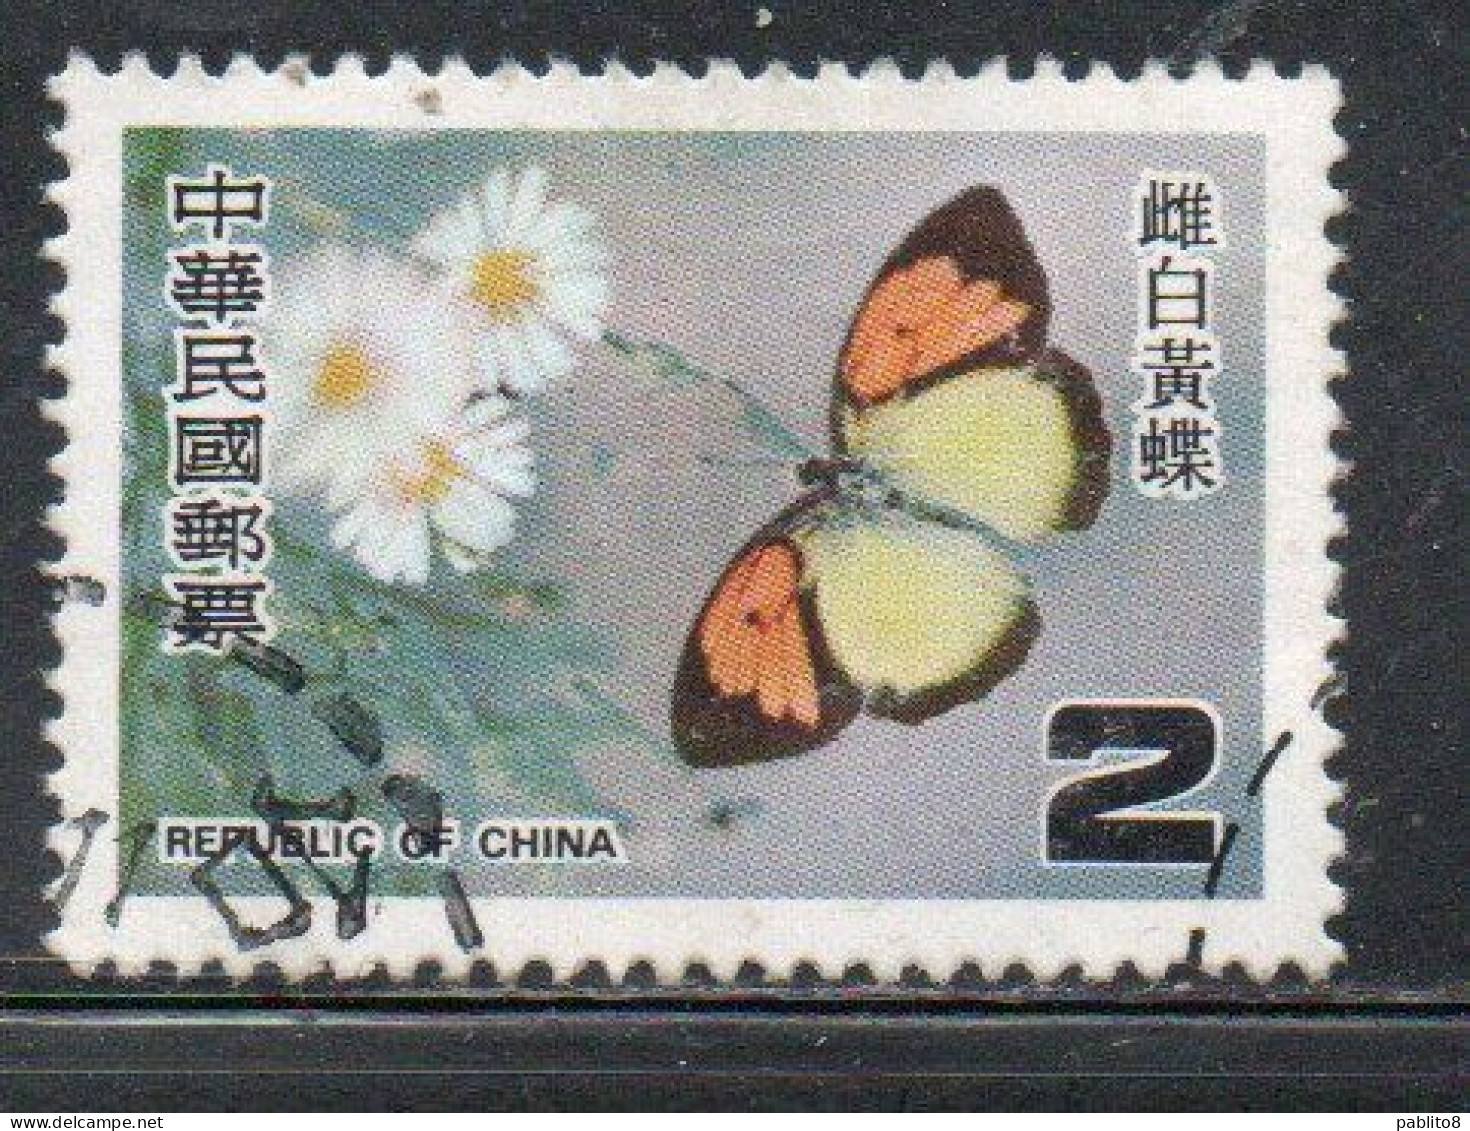 CHINA REPUBLIC CINA TAIWAN FORMOSA 1978 PROTECTED BUTTERFLIES IXIAS PYRENE BUTTERFLY 2$ USED USATO OBLITERE' - Gebruikt